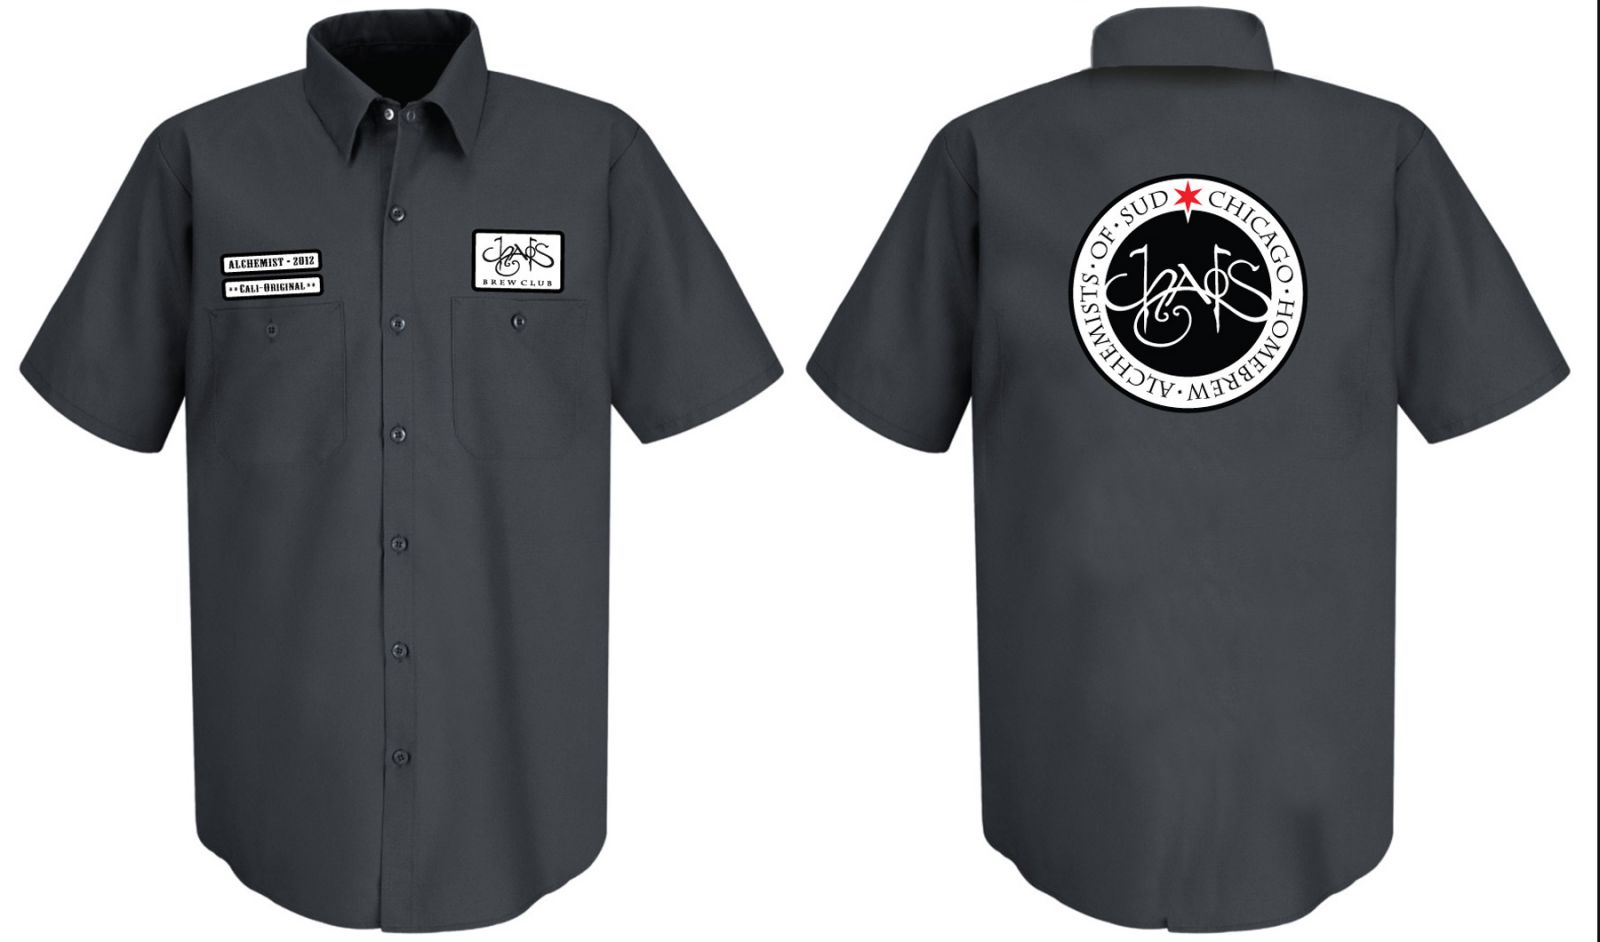 CHAOS Brewery Style Work Shirts | CHAOS Brew Club